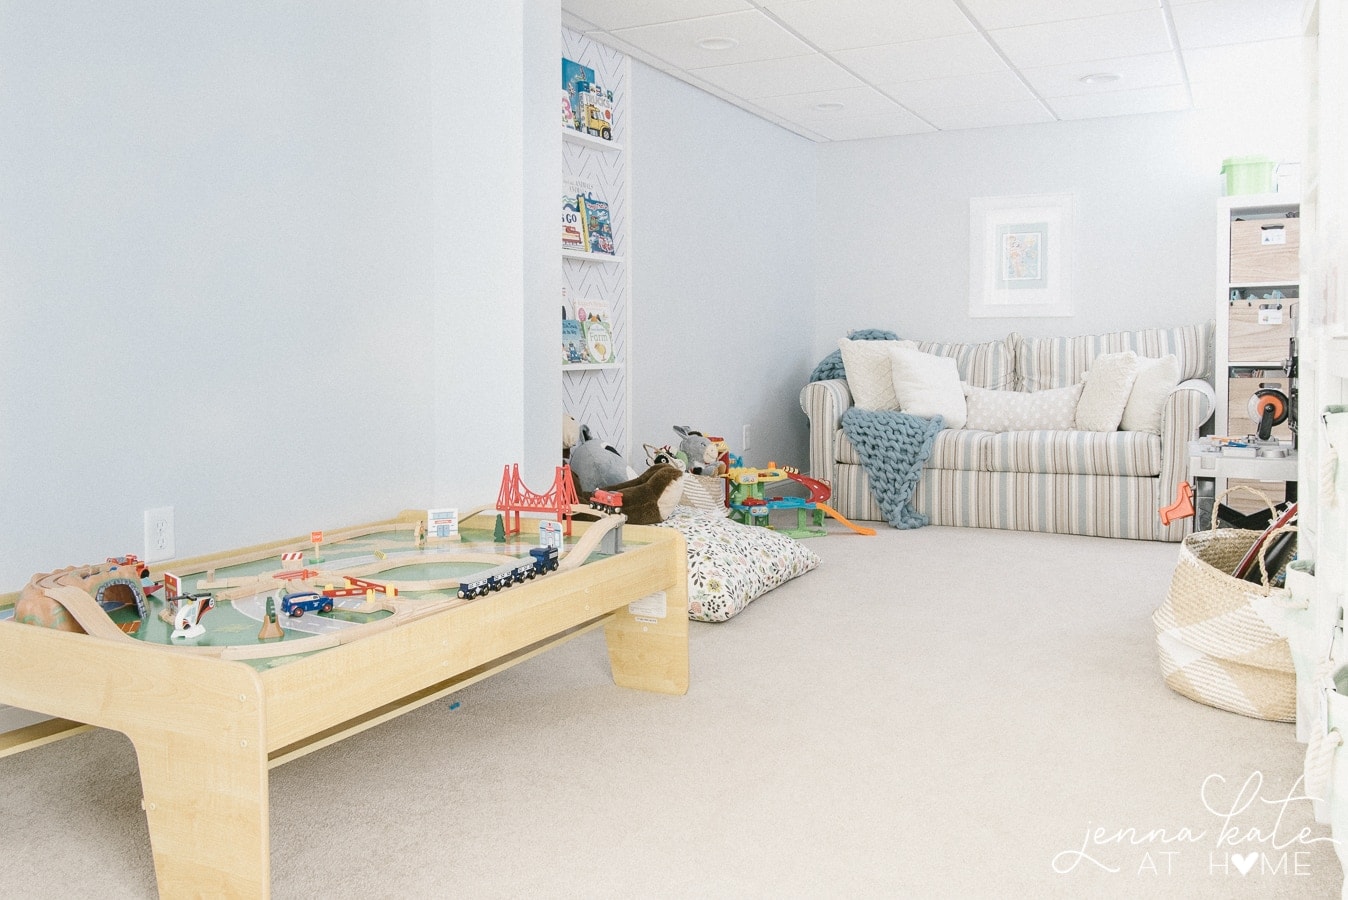 A snapshot of an organized playroom with a couch, play table, and open floor space.